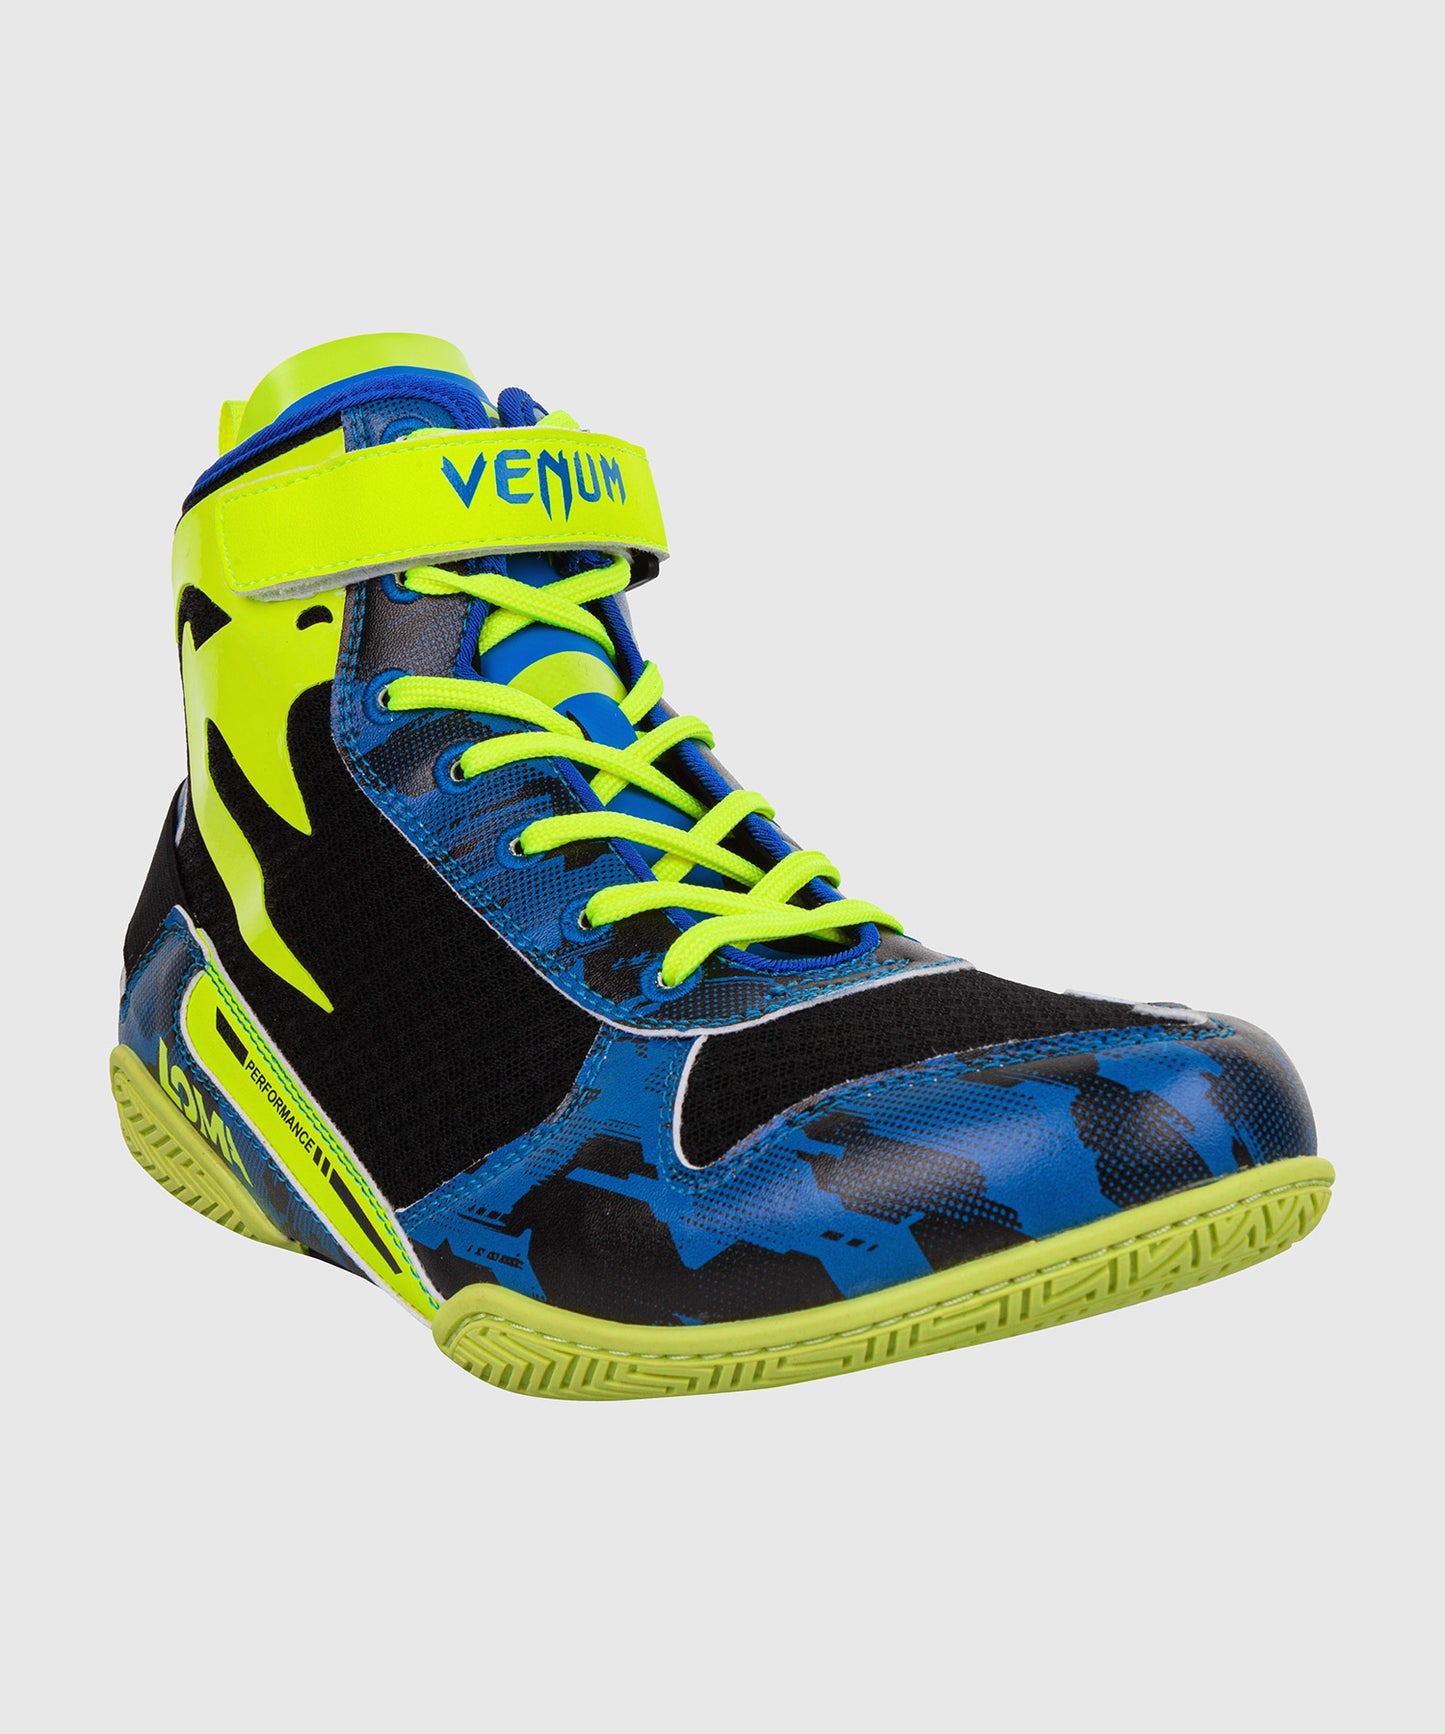 Venum Giant Low Loma Edition Boxing Shoes